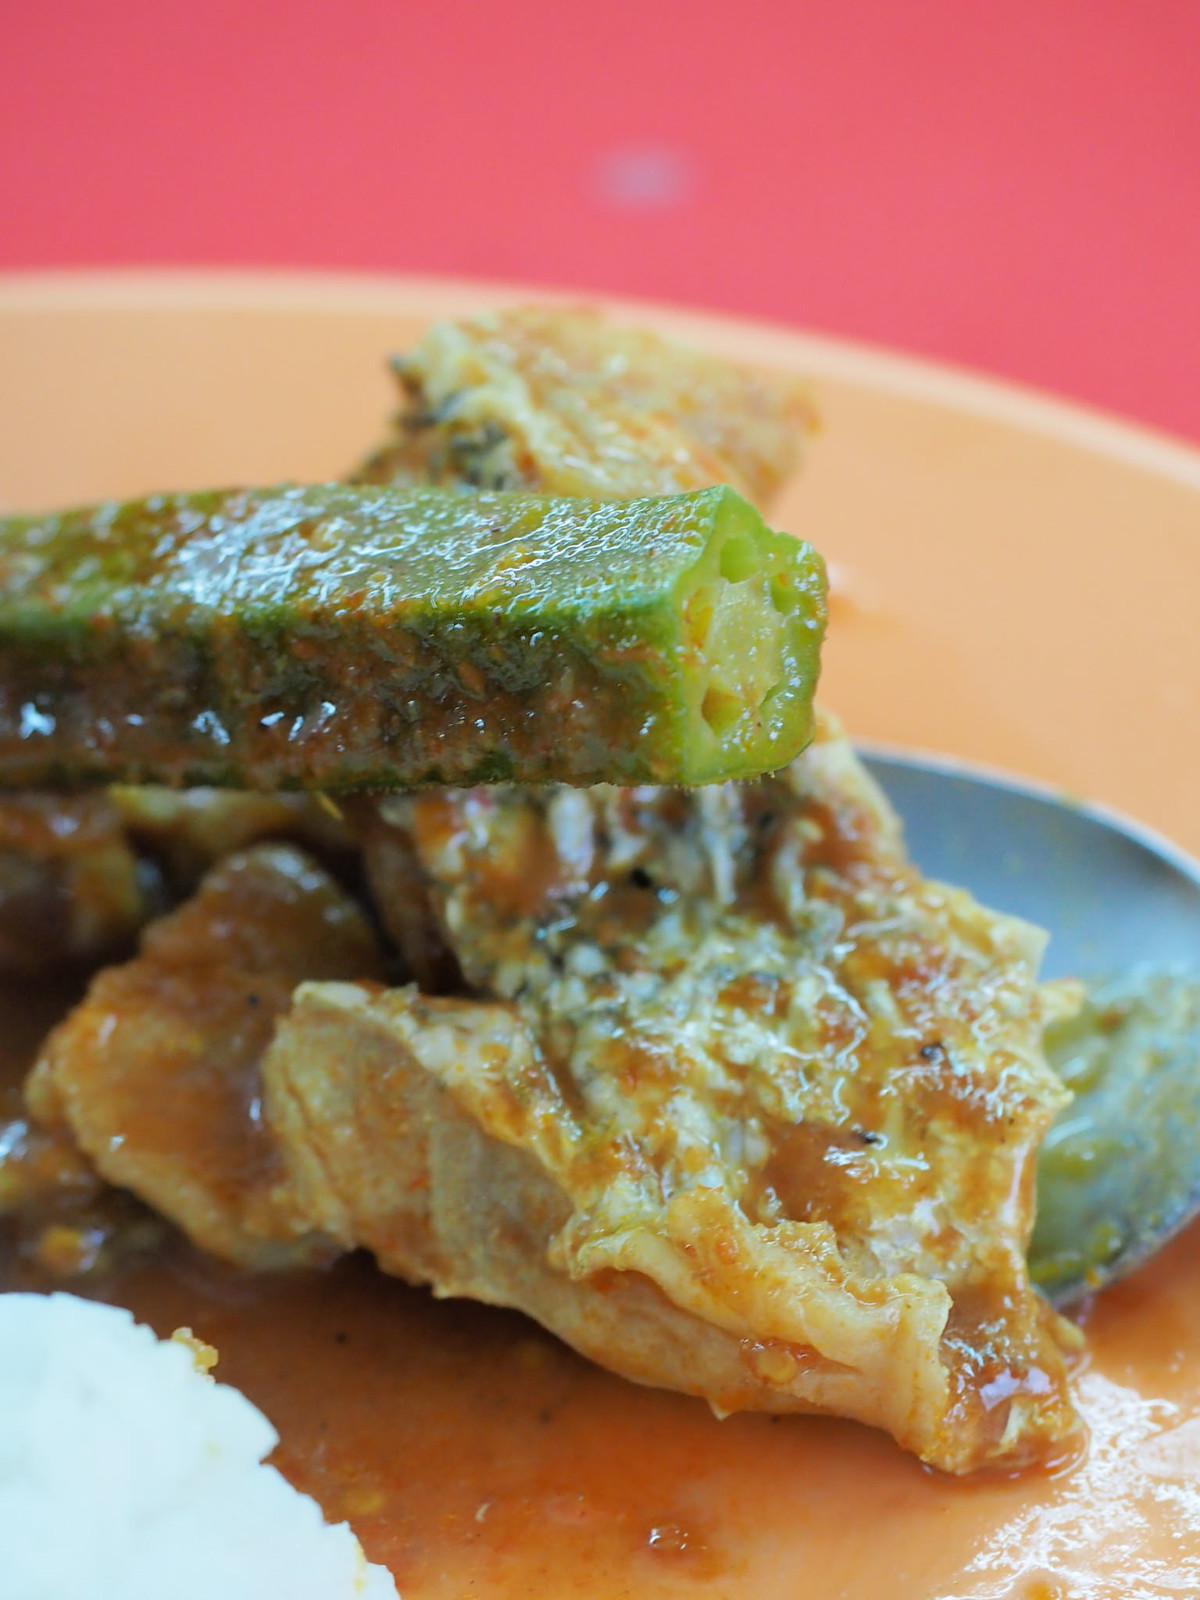 Okra / Lady’s Finger from the Curry Fish Head